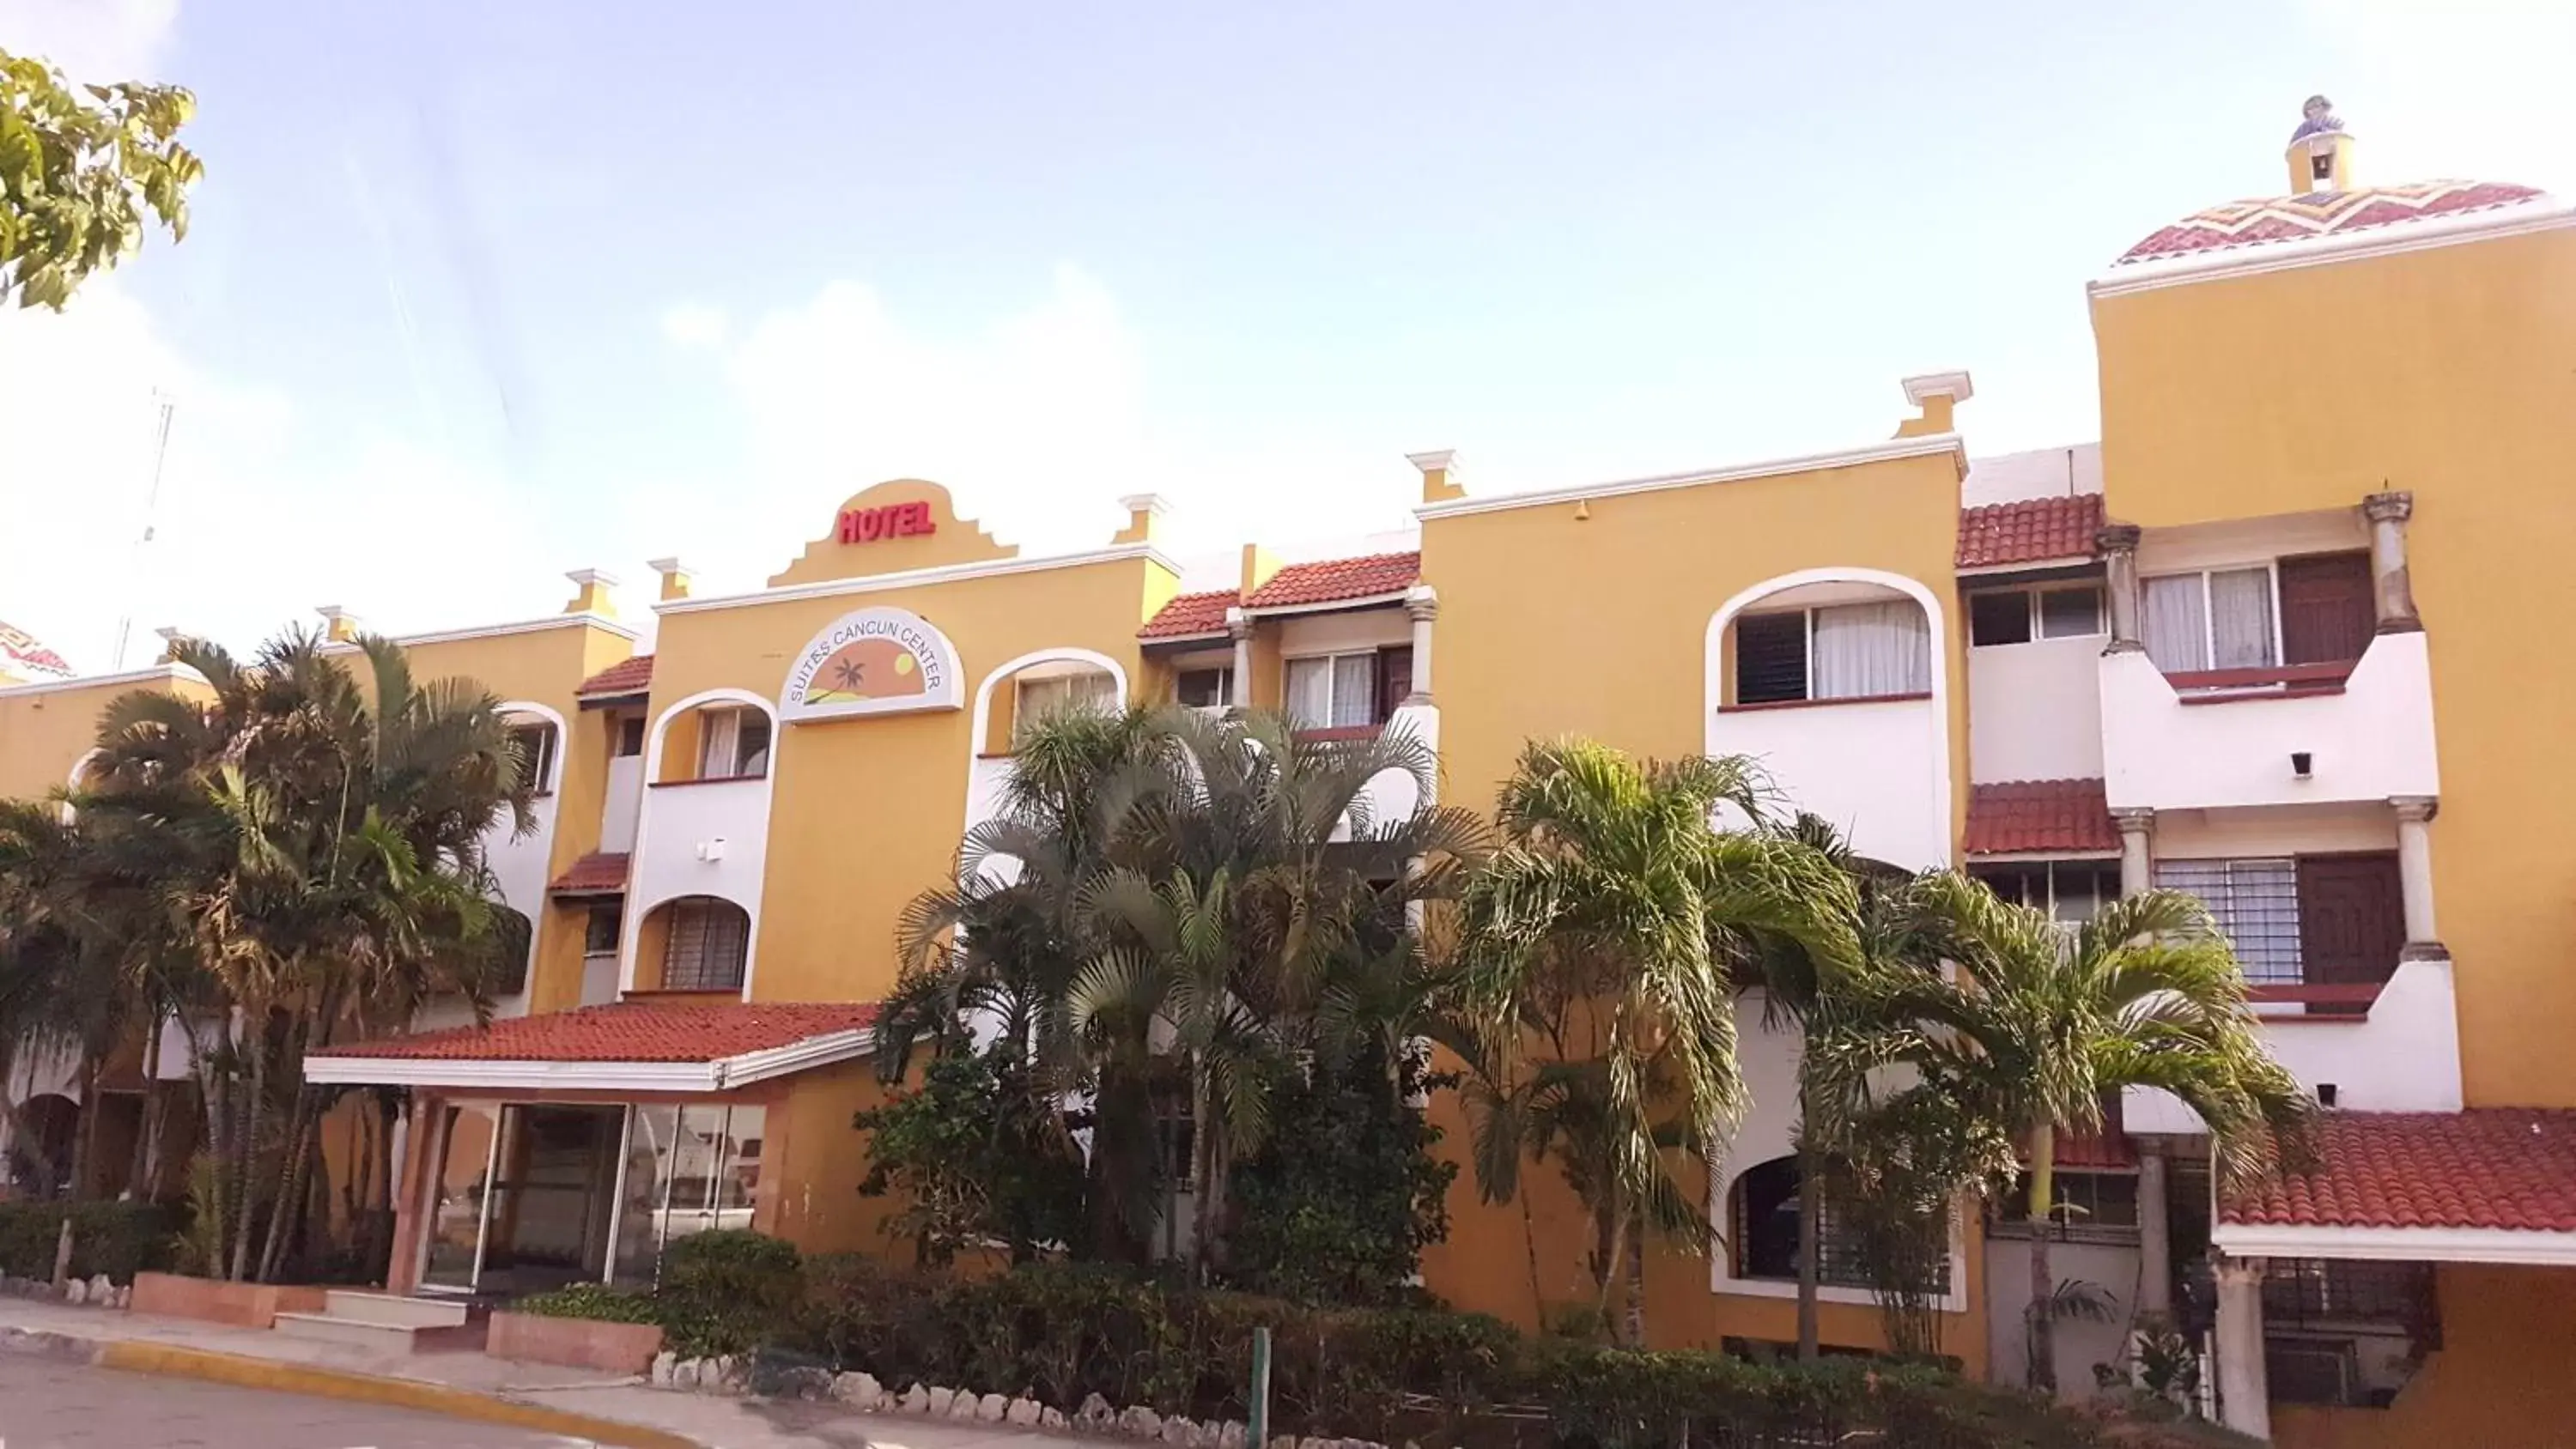 Property Building in Suites Cancun Center